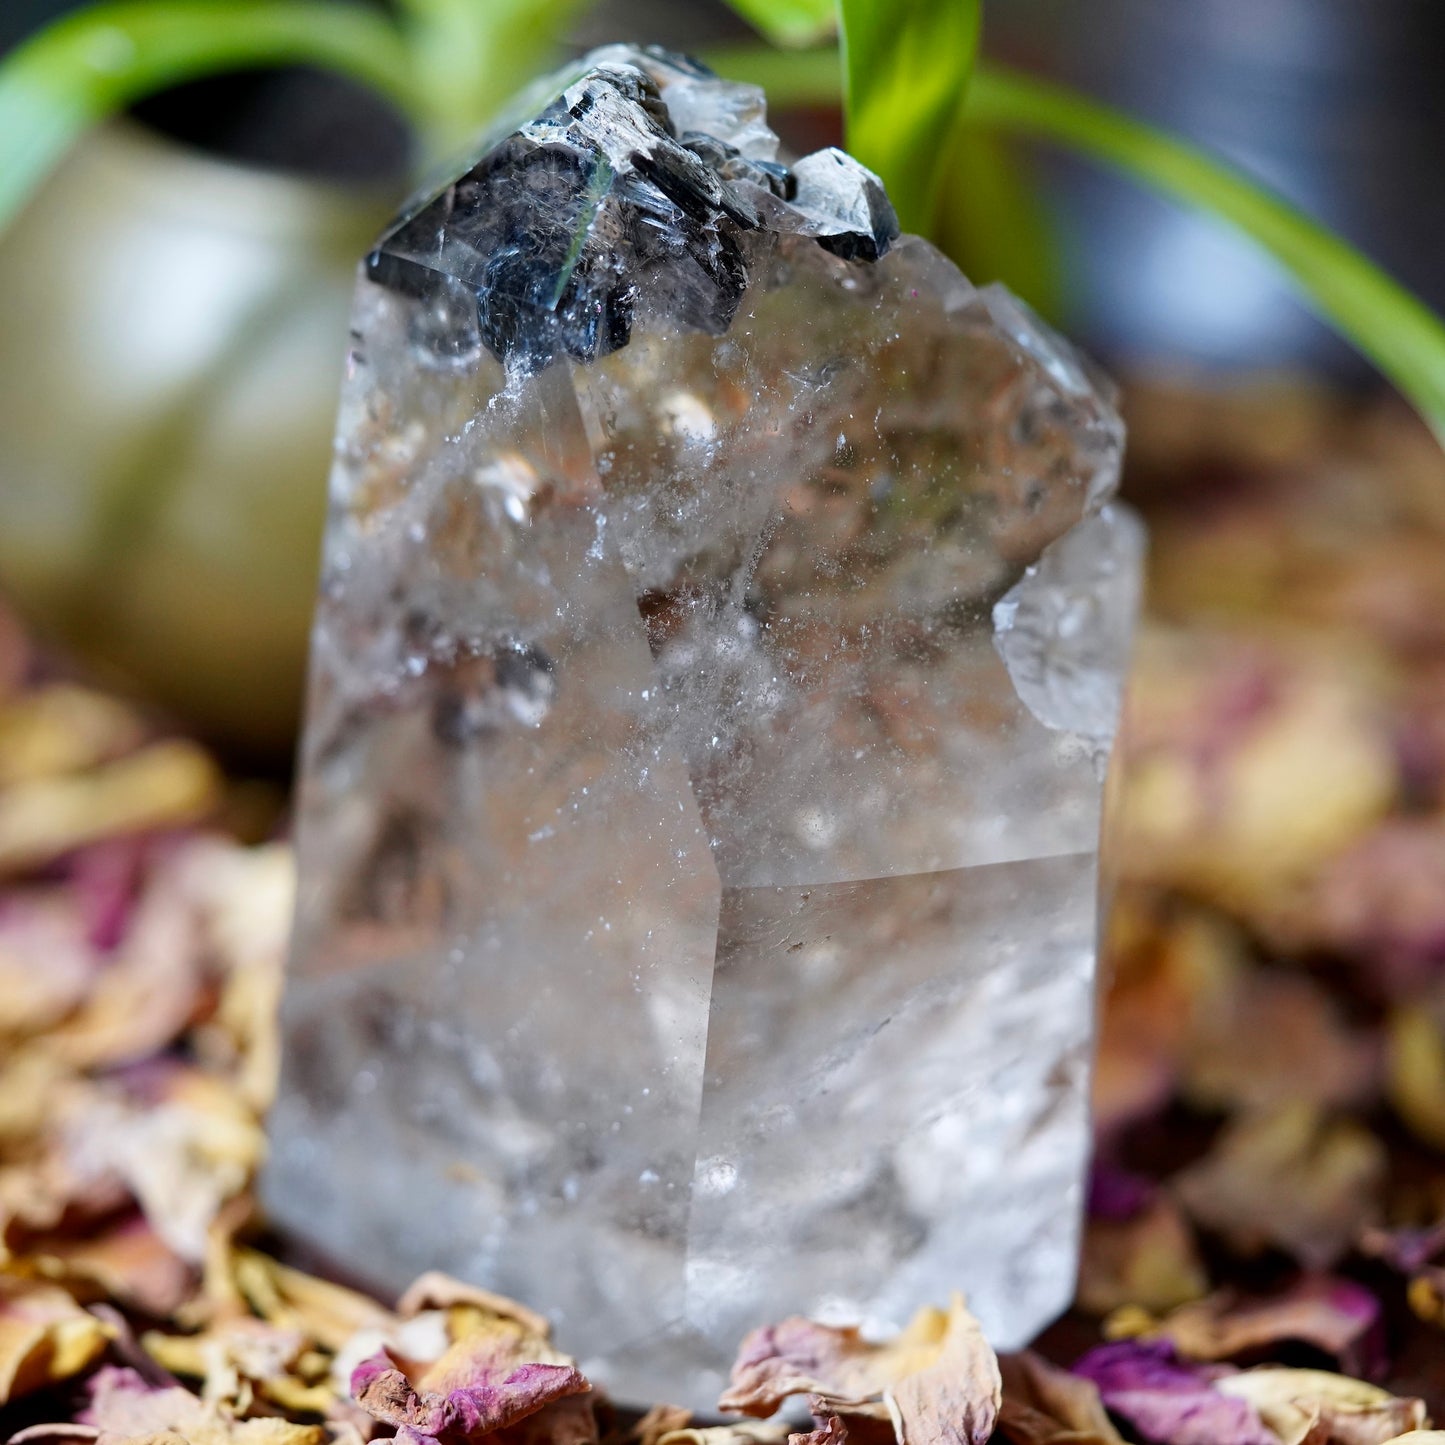 Large Clear Quartz tower with black Biotite Mica crystals on tip with dried roses and green plant in background